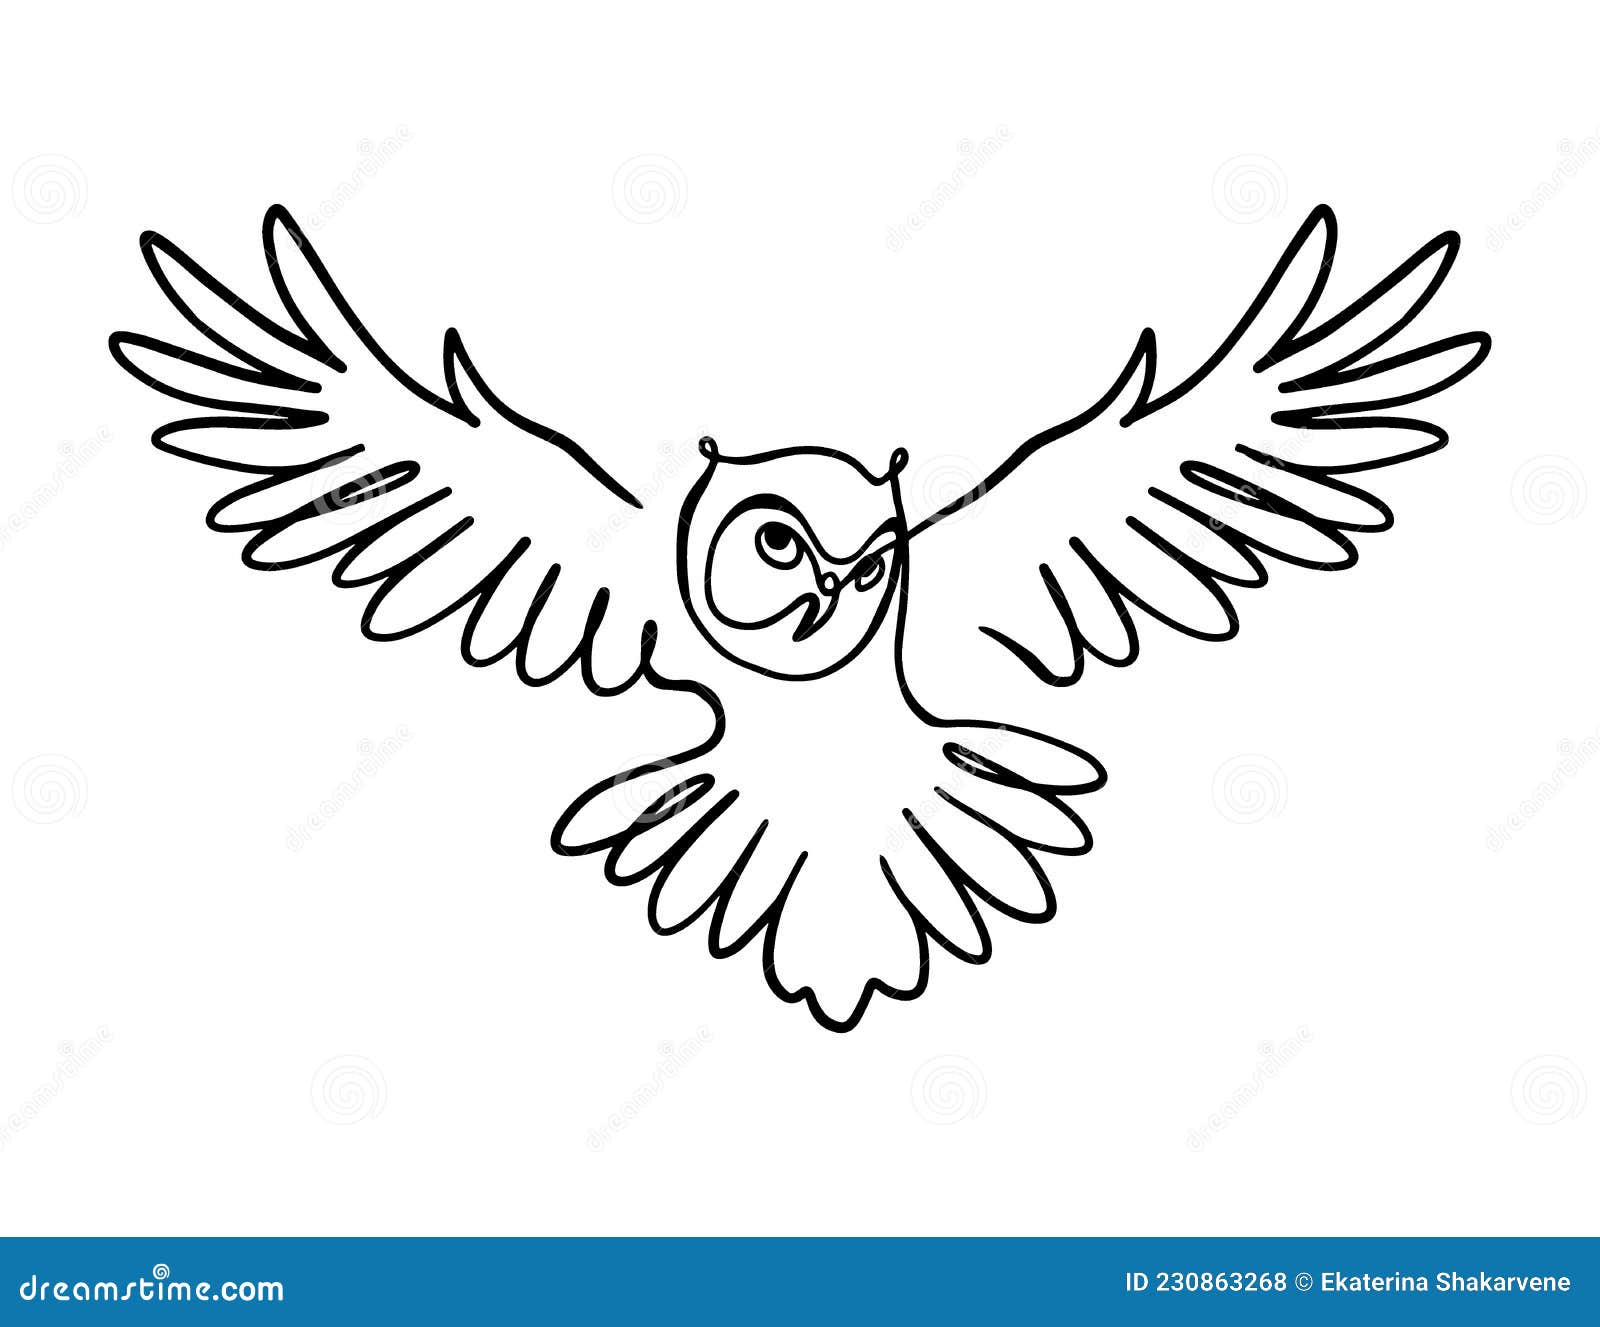 5018 Owl Tattoo Outline Images Stock Photos  Vectors  Shutterstock